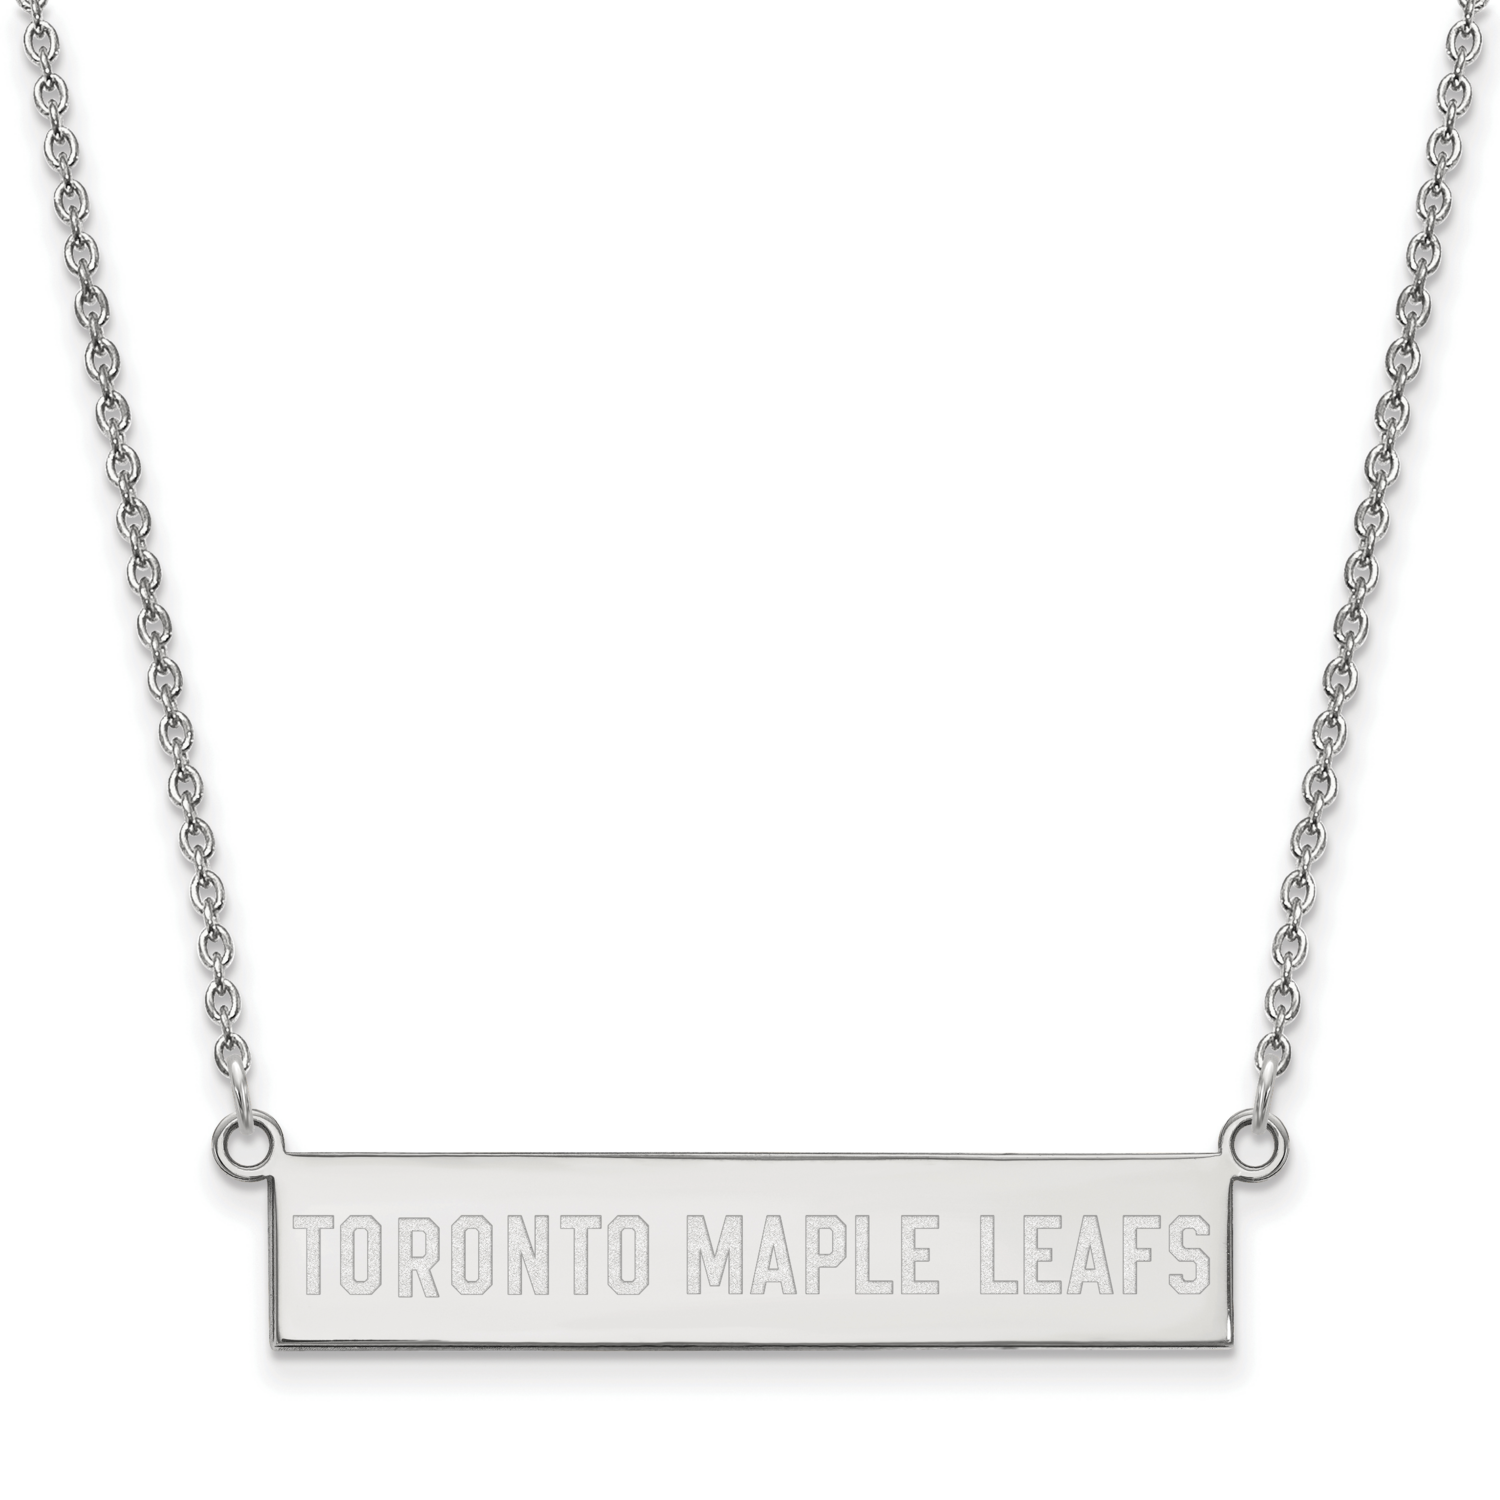 Toronto Maple Leafs Small Bar Necklace Sterling Silver Rhodium-plated SS038MLE-18